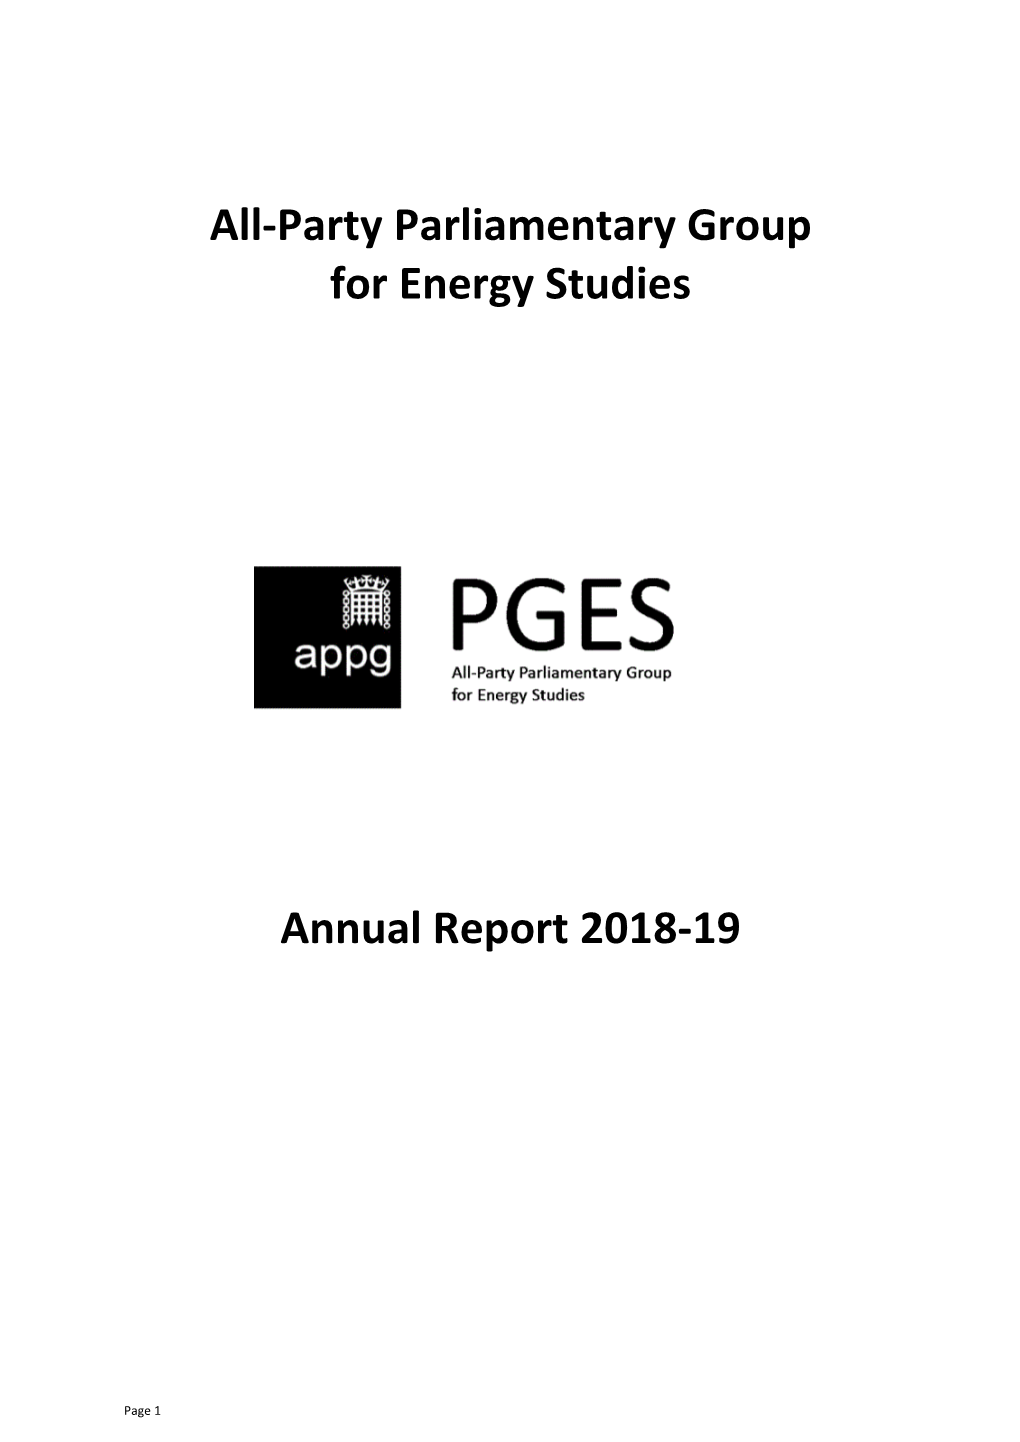 All-Party Parliamentary Group for Energy Studies Annual Report 2018-19